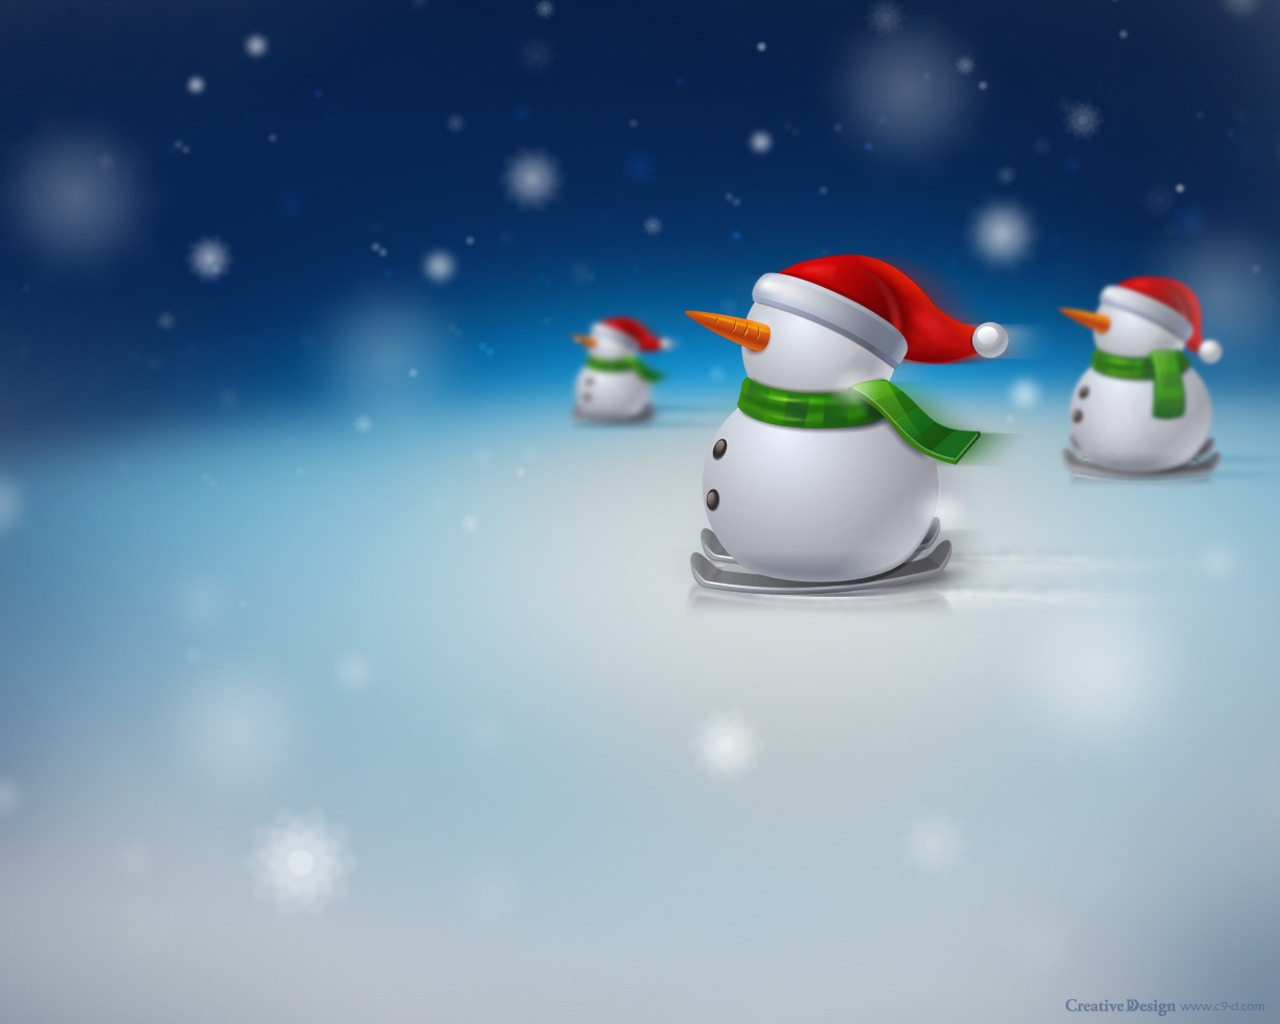 Snowman for 1280 x 1024 resolution